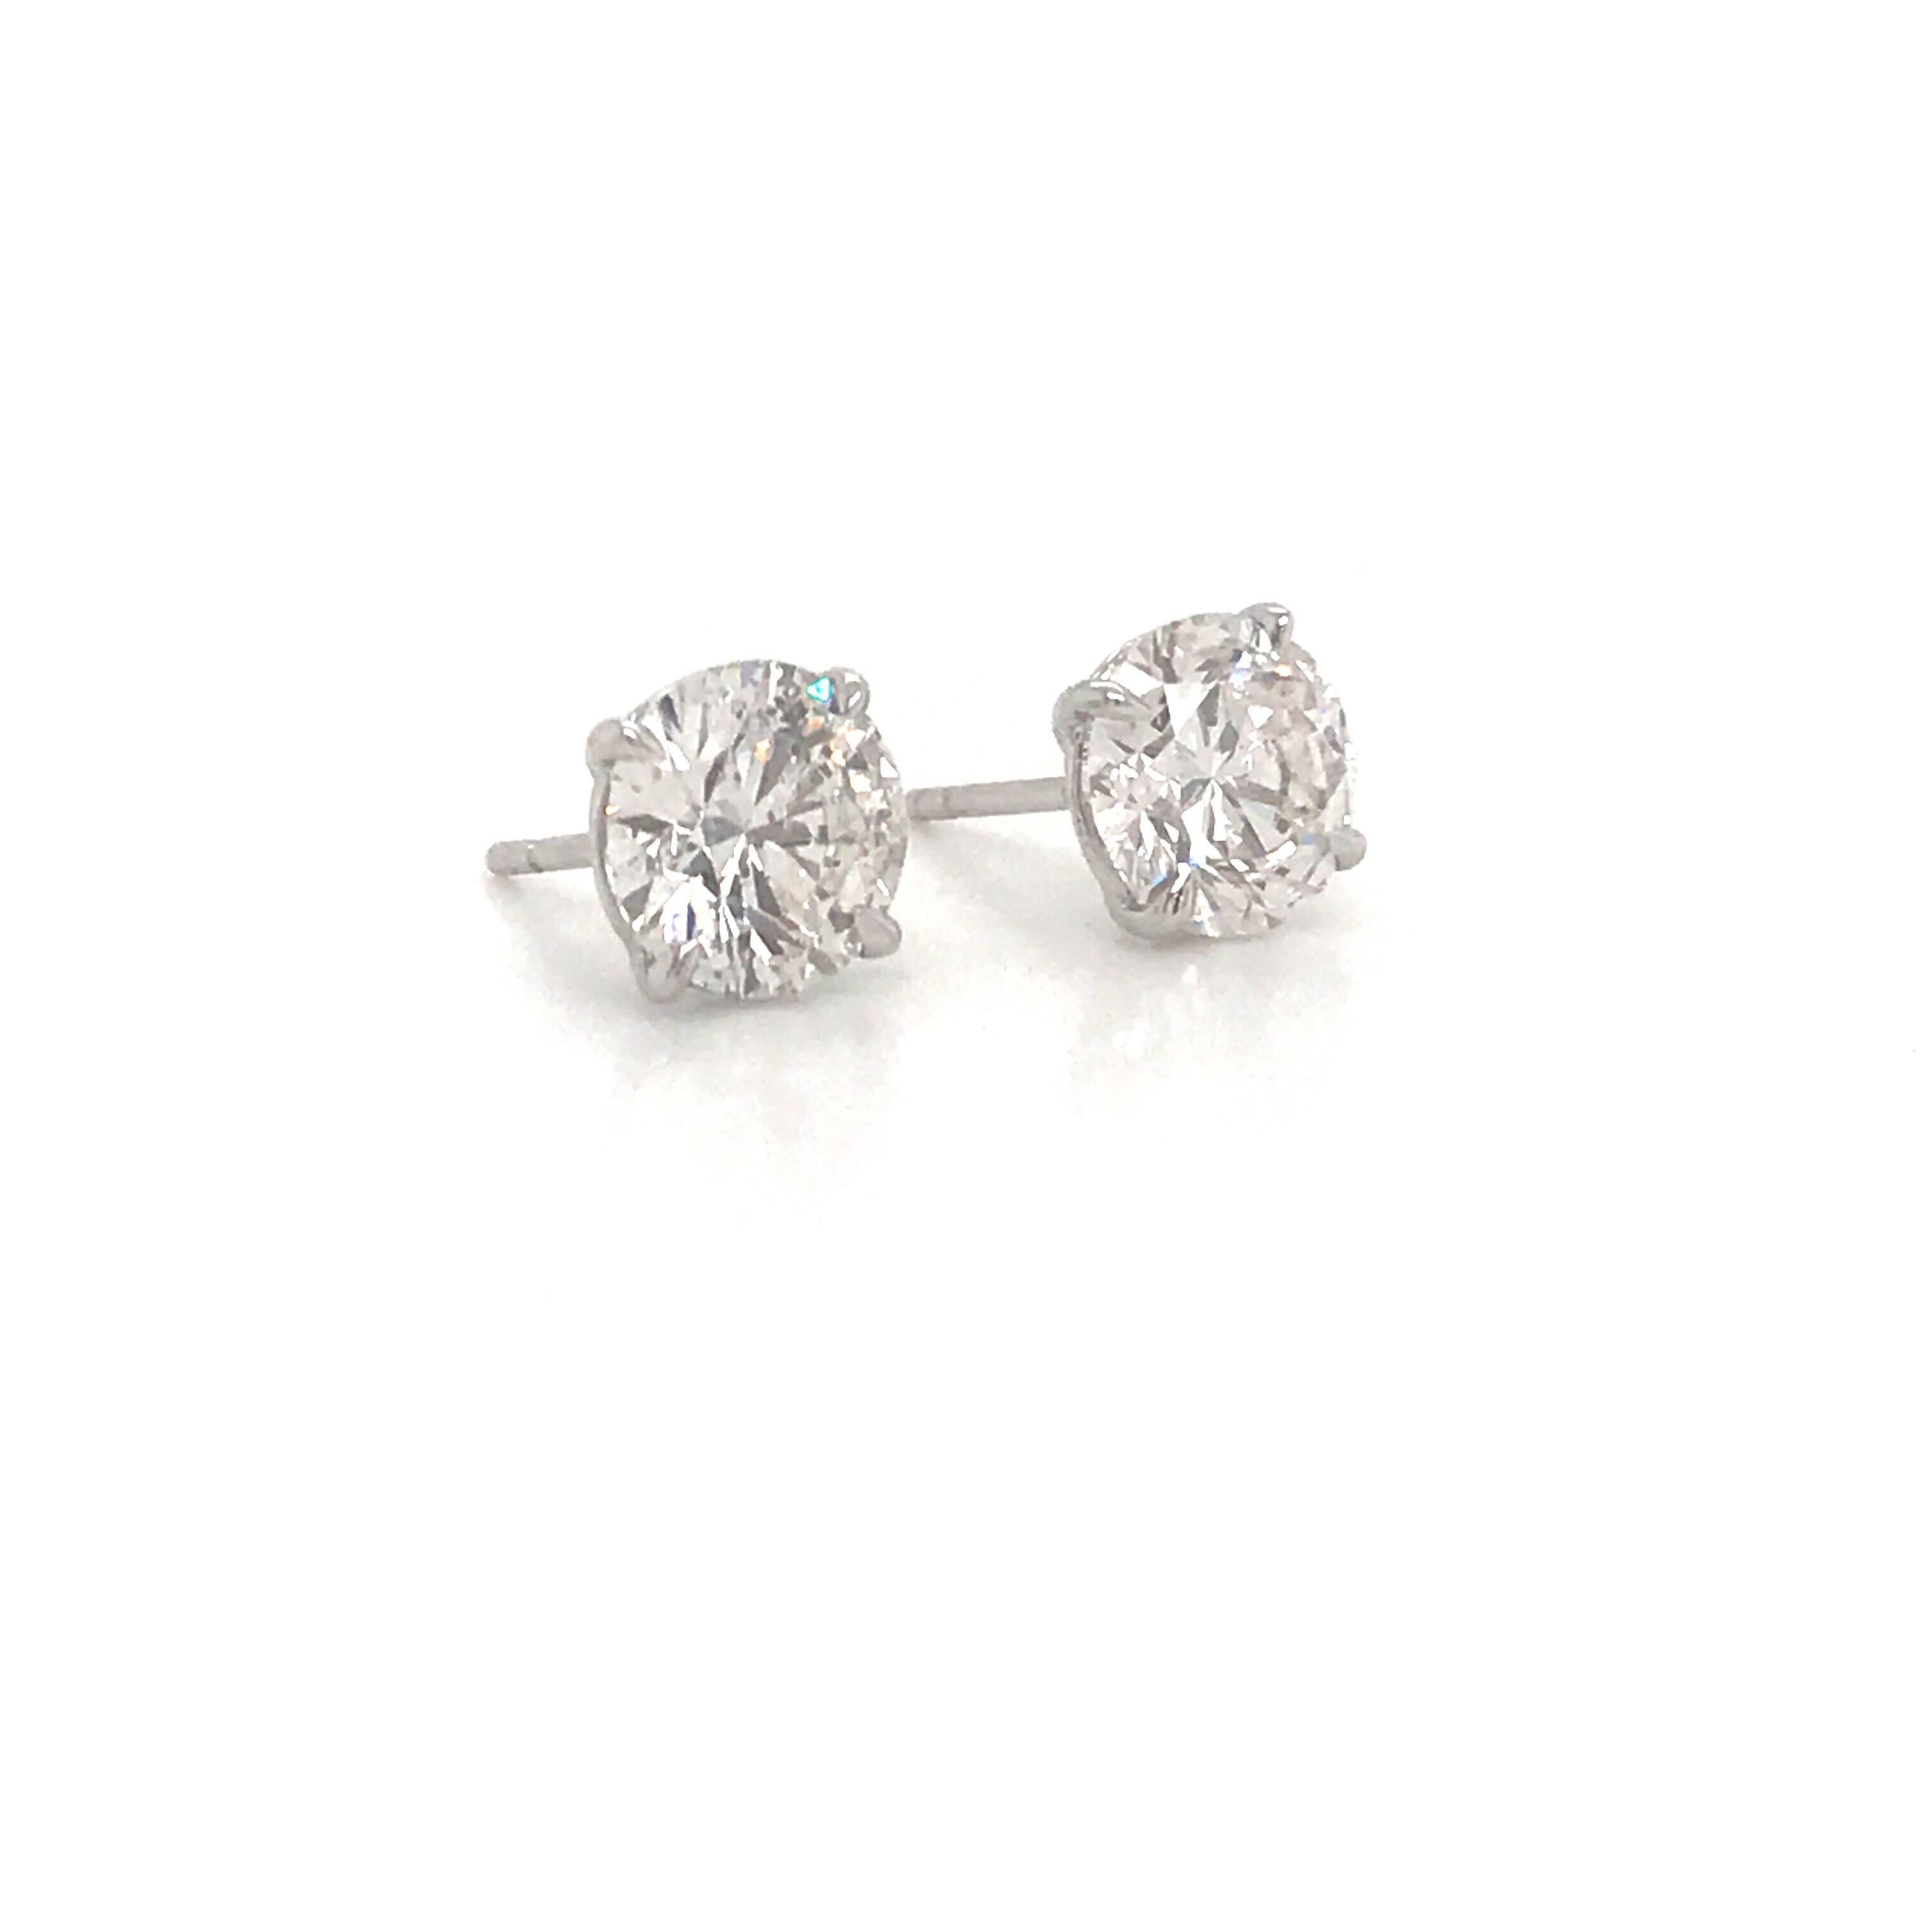 GIA Certified diamond stud earrings weighing 2.89 carats in a 4 prong champagne setting.
Color G-H
Clartiy I1-I2

Eye clean and full of brilliance. 